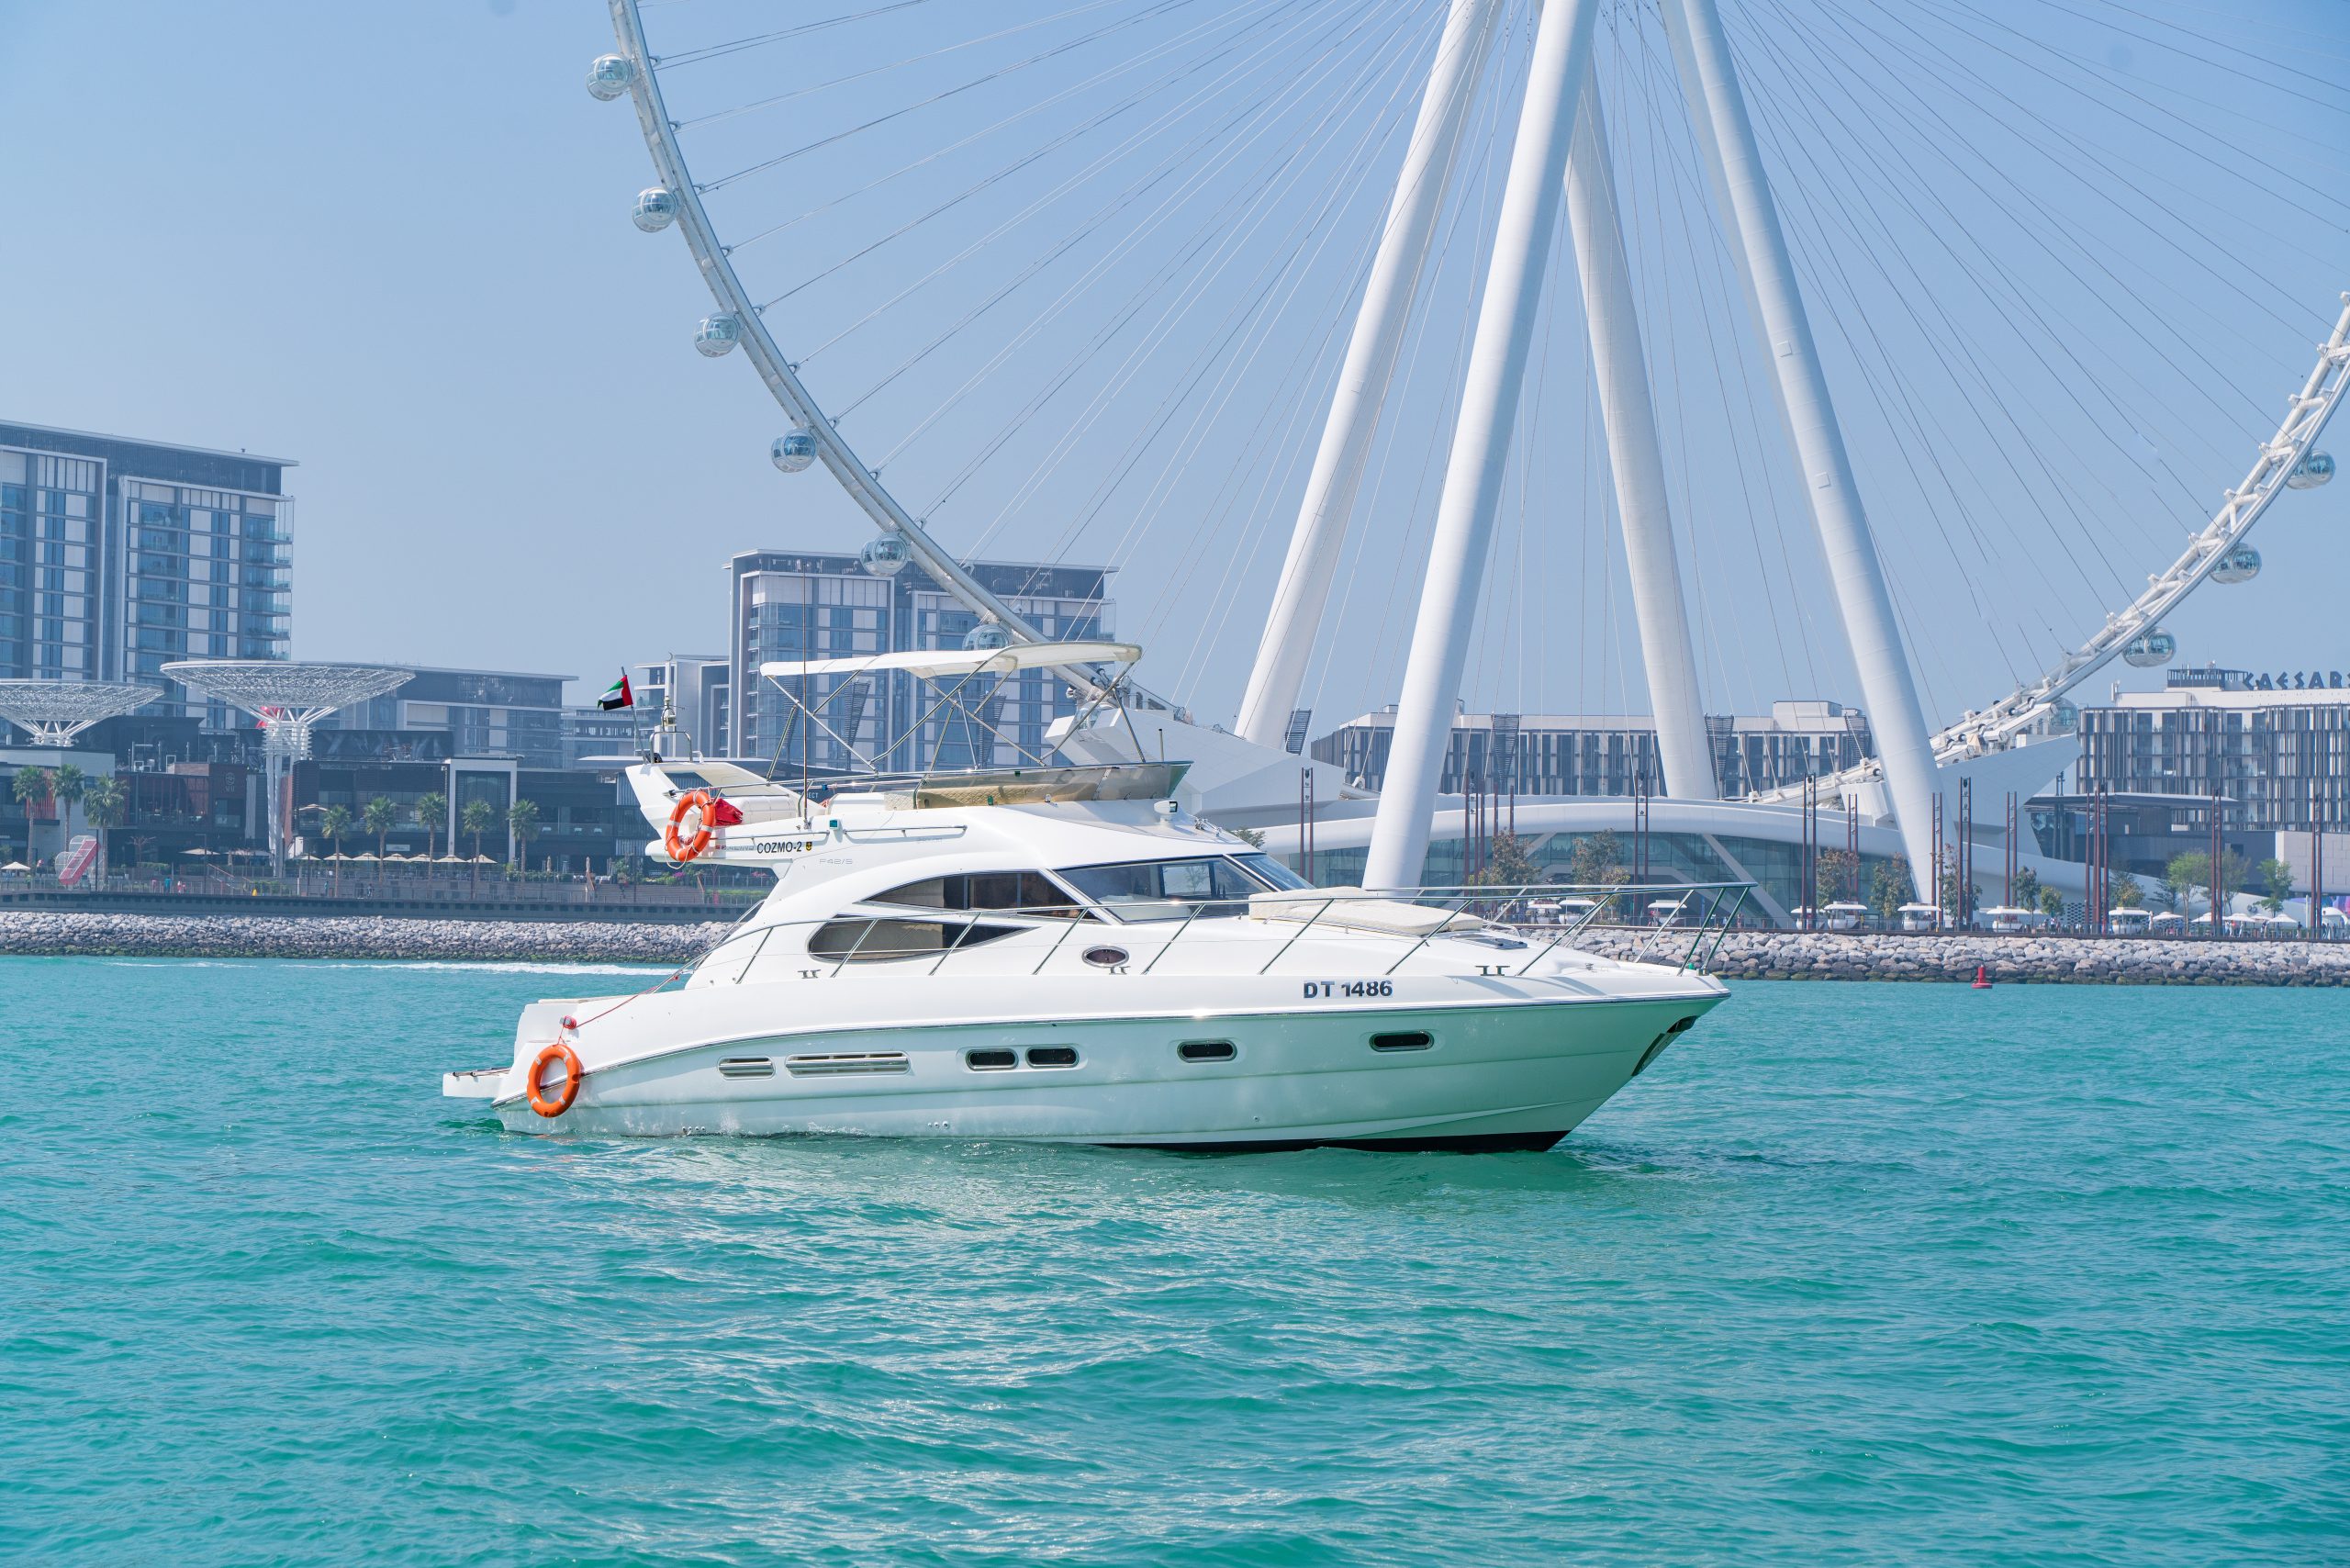 cozmo yachts reviews